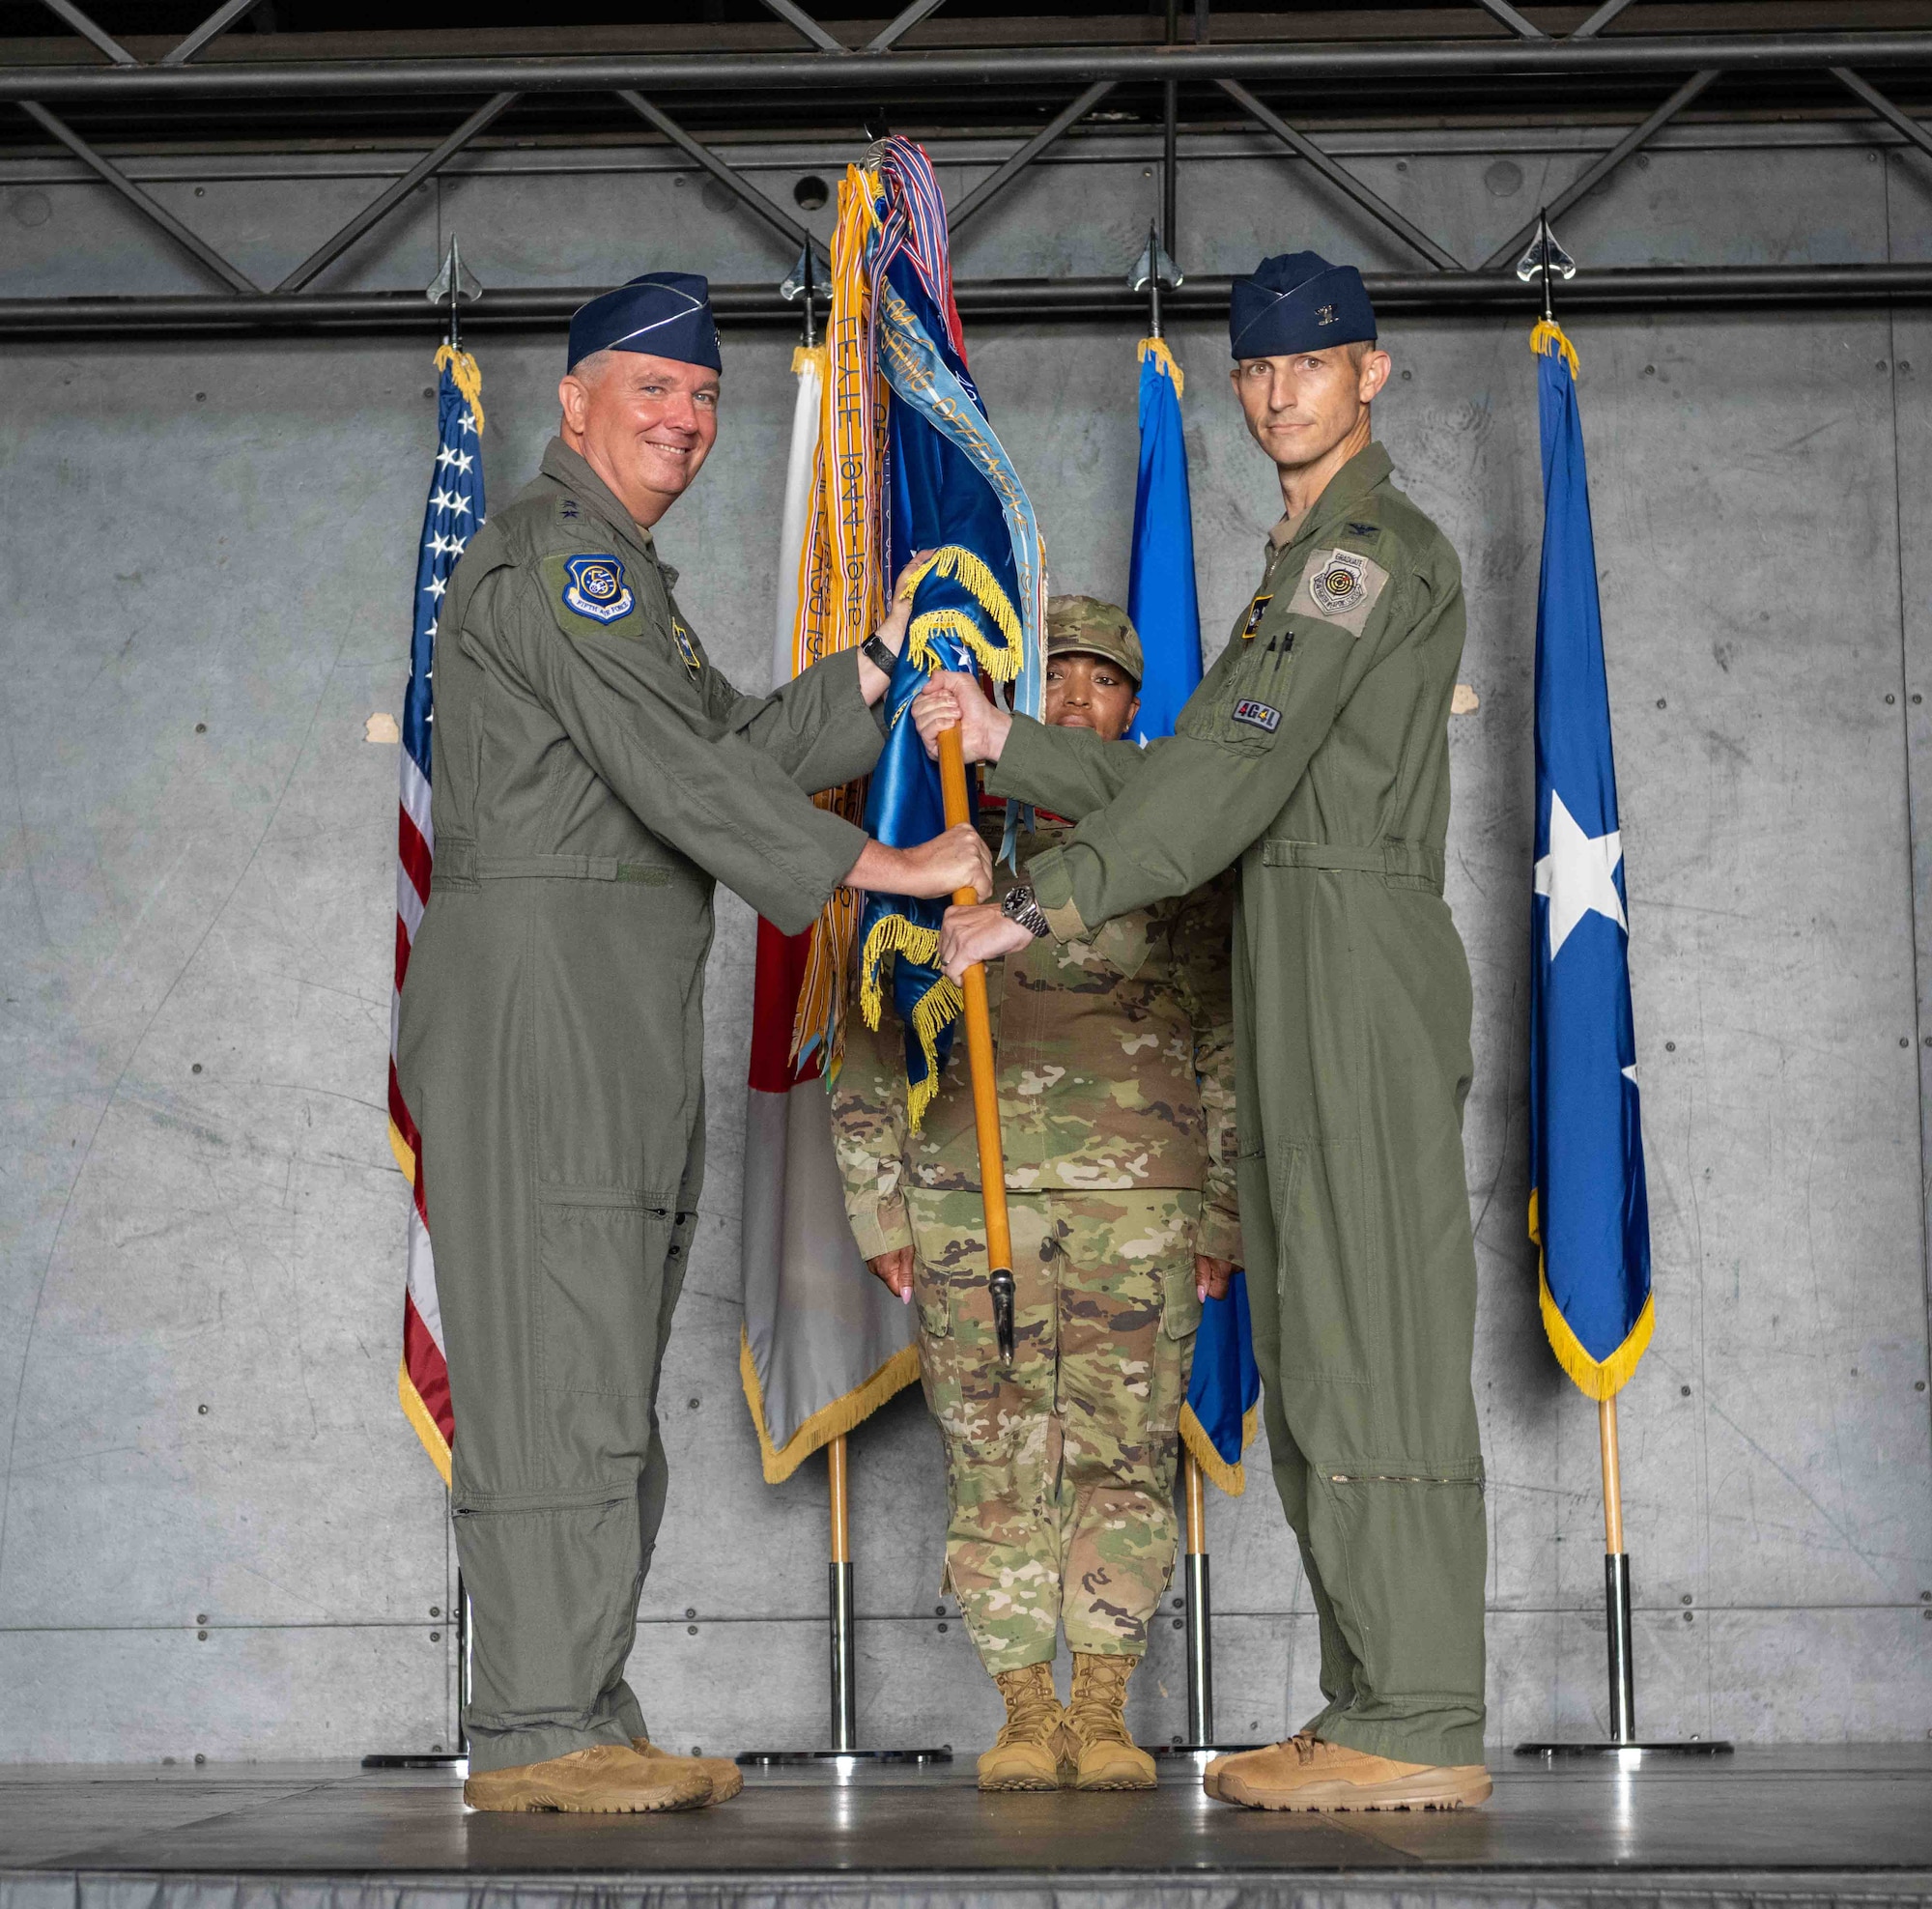 United States U.S. Air Force Lt. Gen. Ricky N. Rupp, left, U.S. Forces Japan and 5th Air Force commander, passes the guidon to Col. Michael P. Richard, right, 35th Fighter Wing (FW) incoming commander, during the 35th FW change of command ceremony at Misawa Air Base, Japan, June 30, 2022.